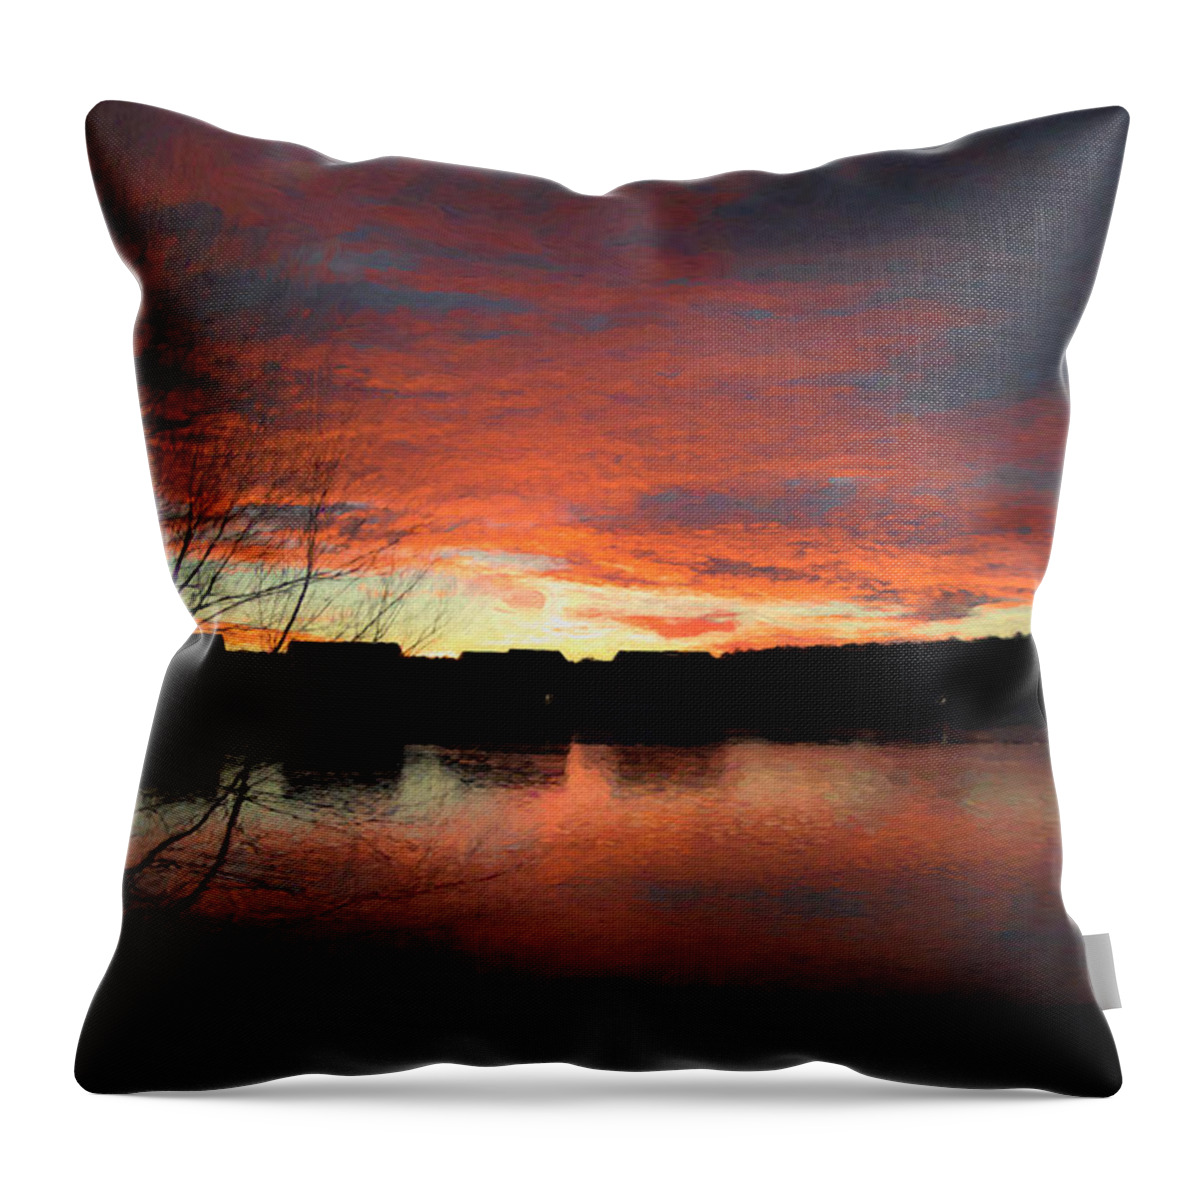 Sunrise Throw Pillow featuring the digital art Given Half a Chance by Jim Ford